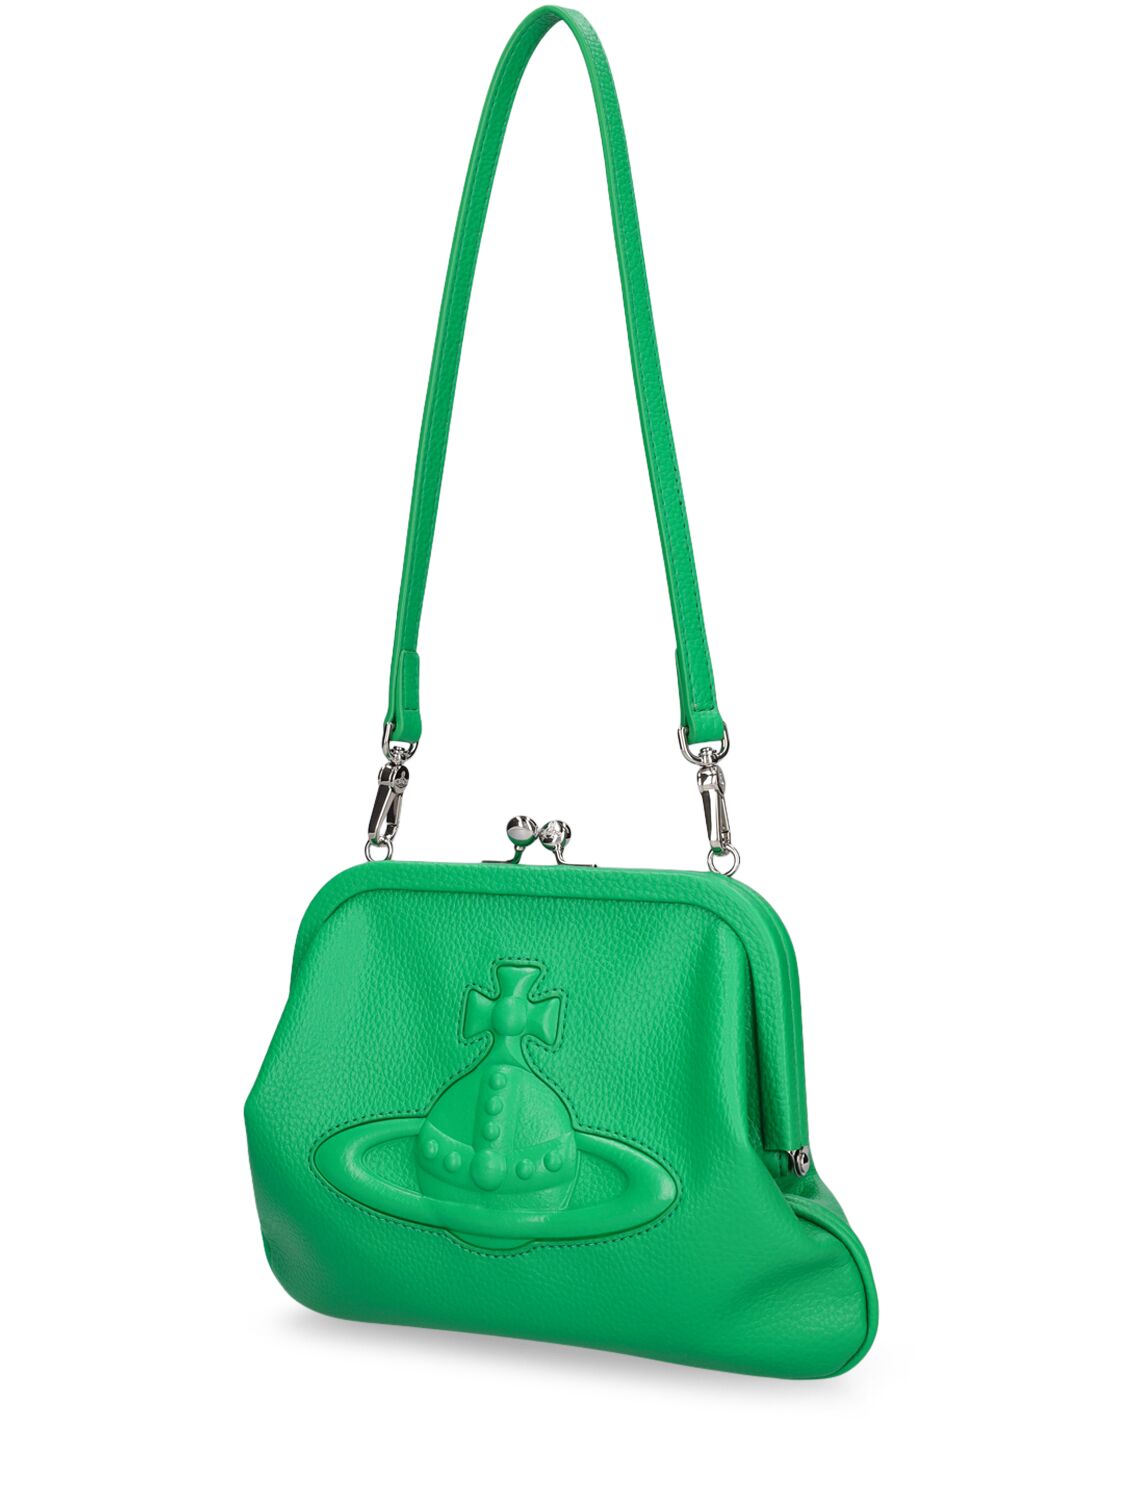 Shop Vivienne Westwood Vivienne's Faux Leather Embossed Clutch In Bright Green